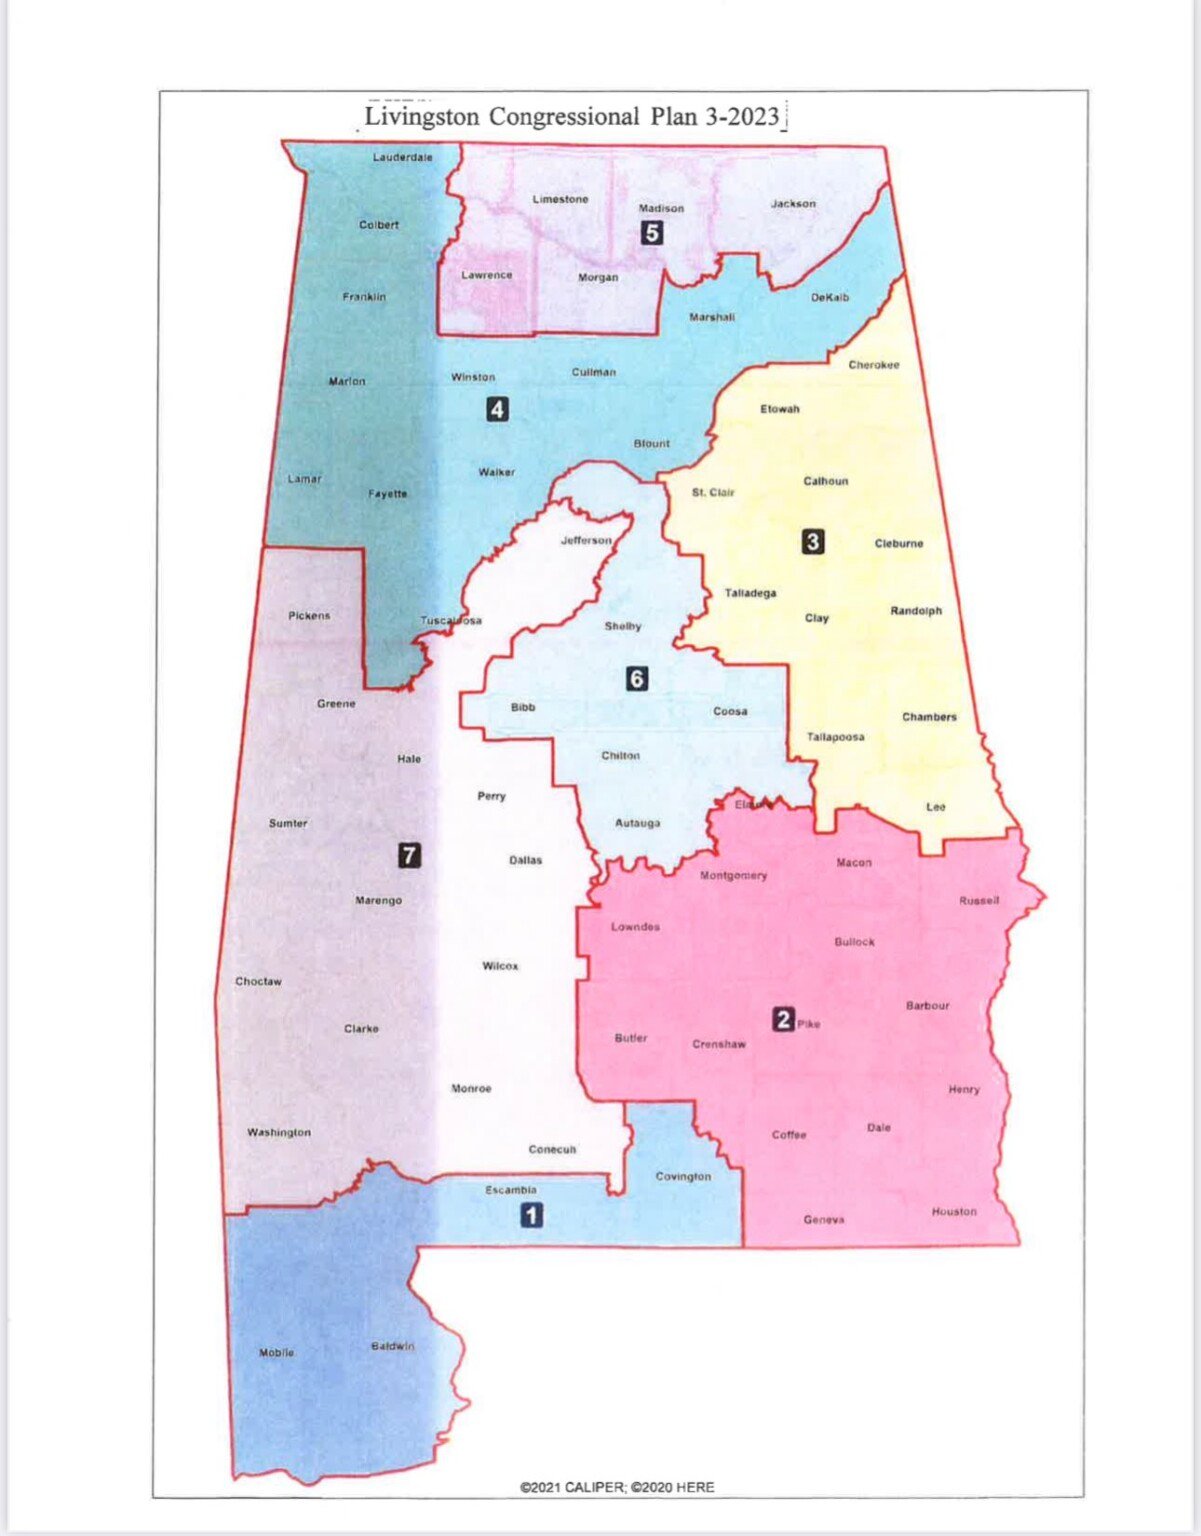 UPDATE: Alabama lawmakers approve new congressional district map - WAKA 8